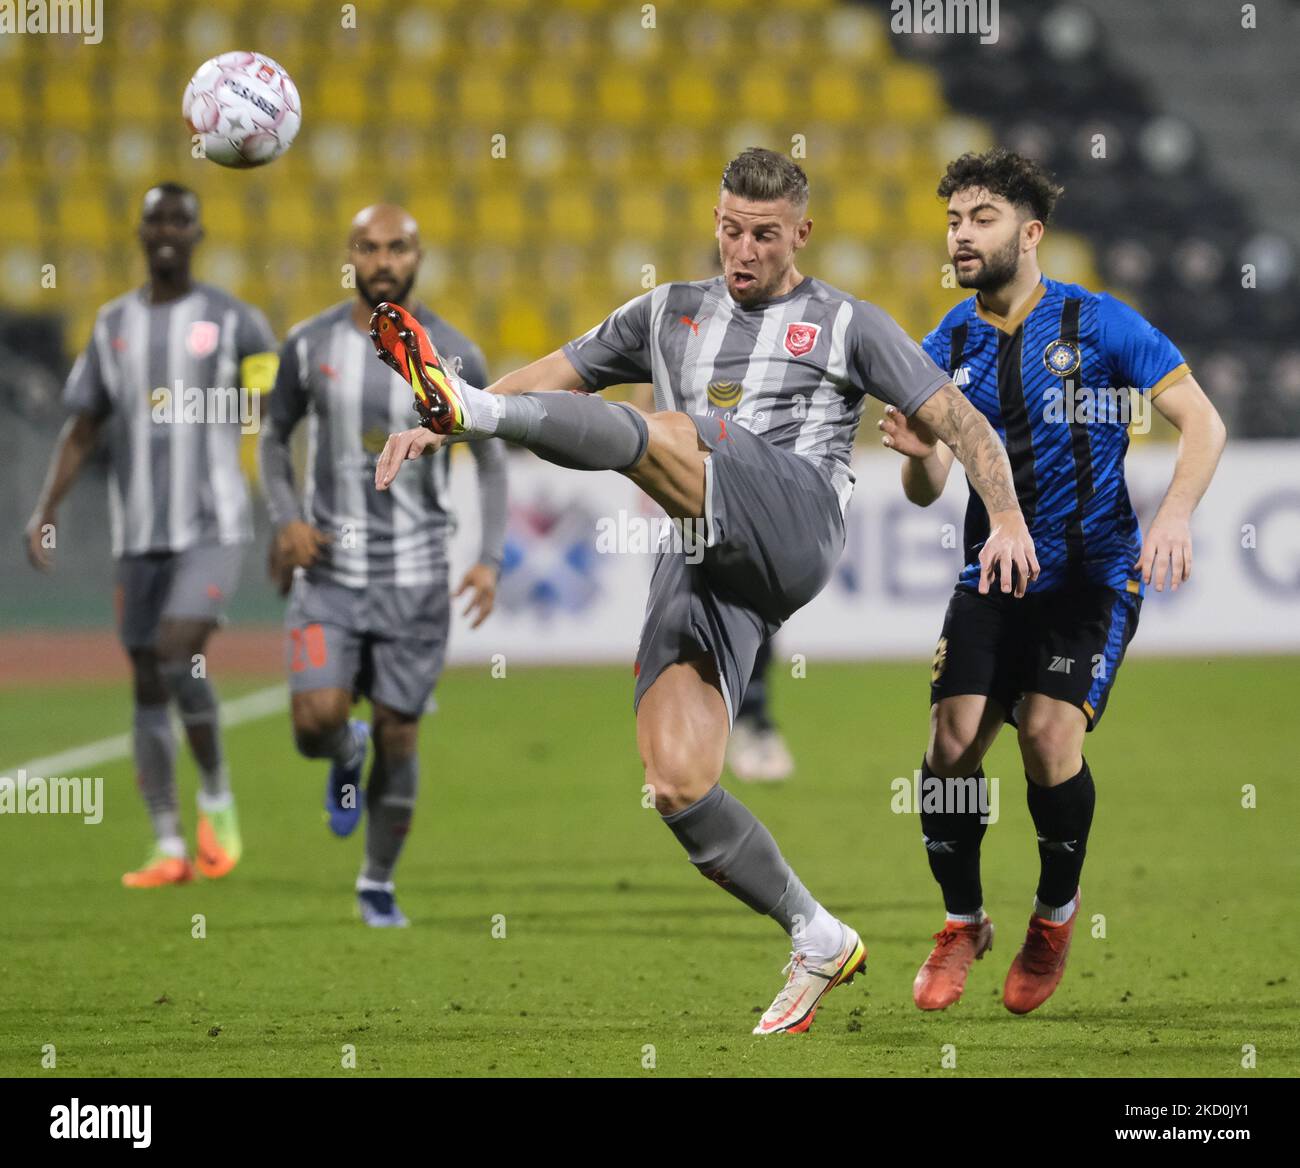 Toby Alderweireld (4) of Al Duhail clears the ball during the QNB Stars League match at the Suheim Bin Hamad Stadium in Doha, Qatar on 17 of January 2022. (Photo by Simon Holmes/NurPhoto) Stock Photo